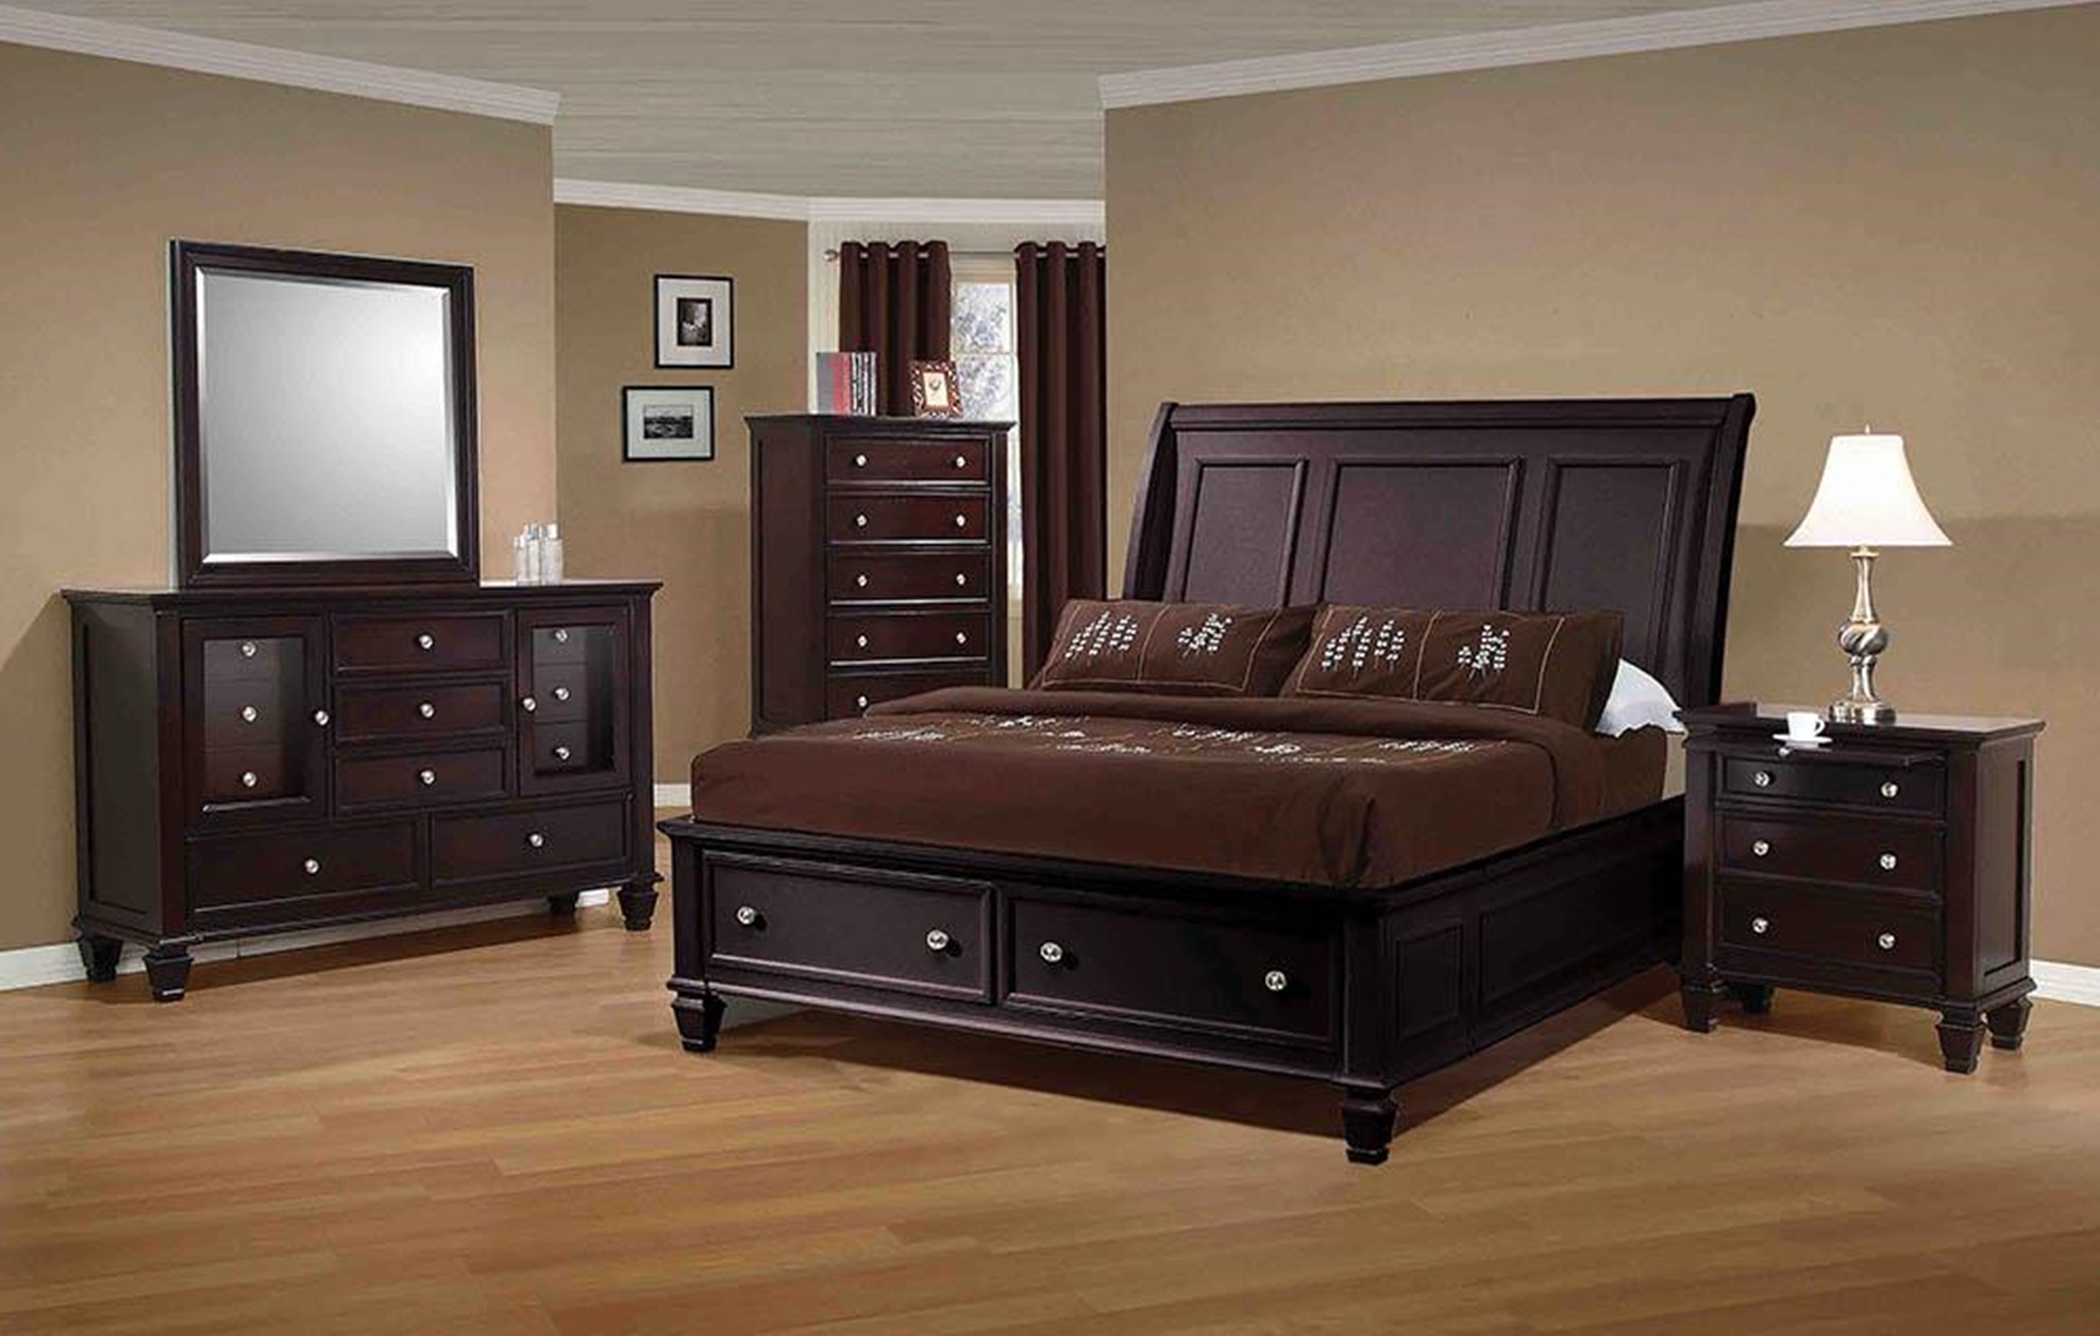 Sandy Beach Capp King Sleigh Bed - Click Image to Close